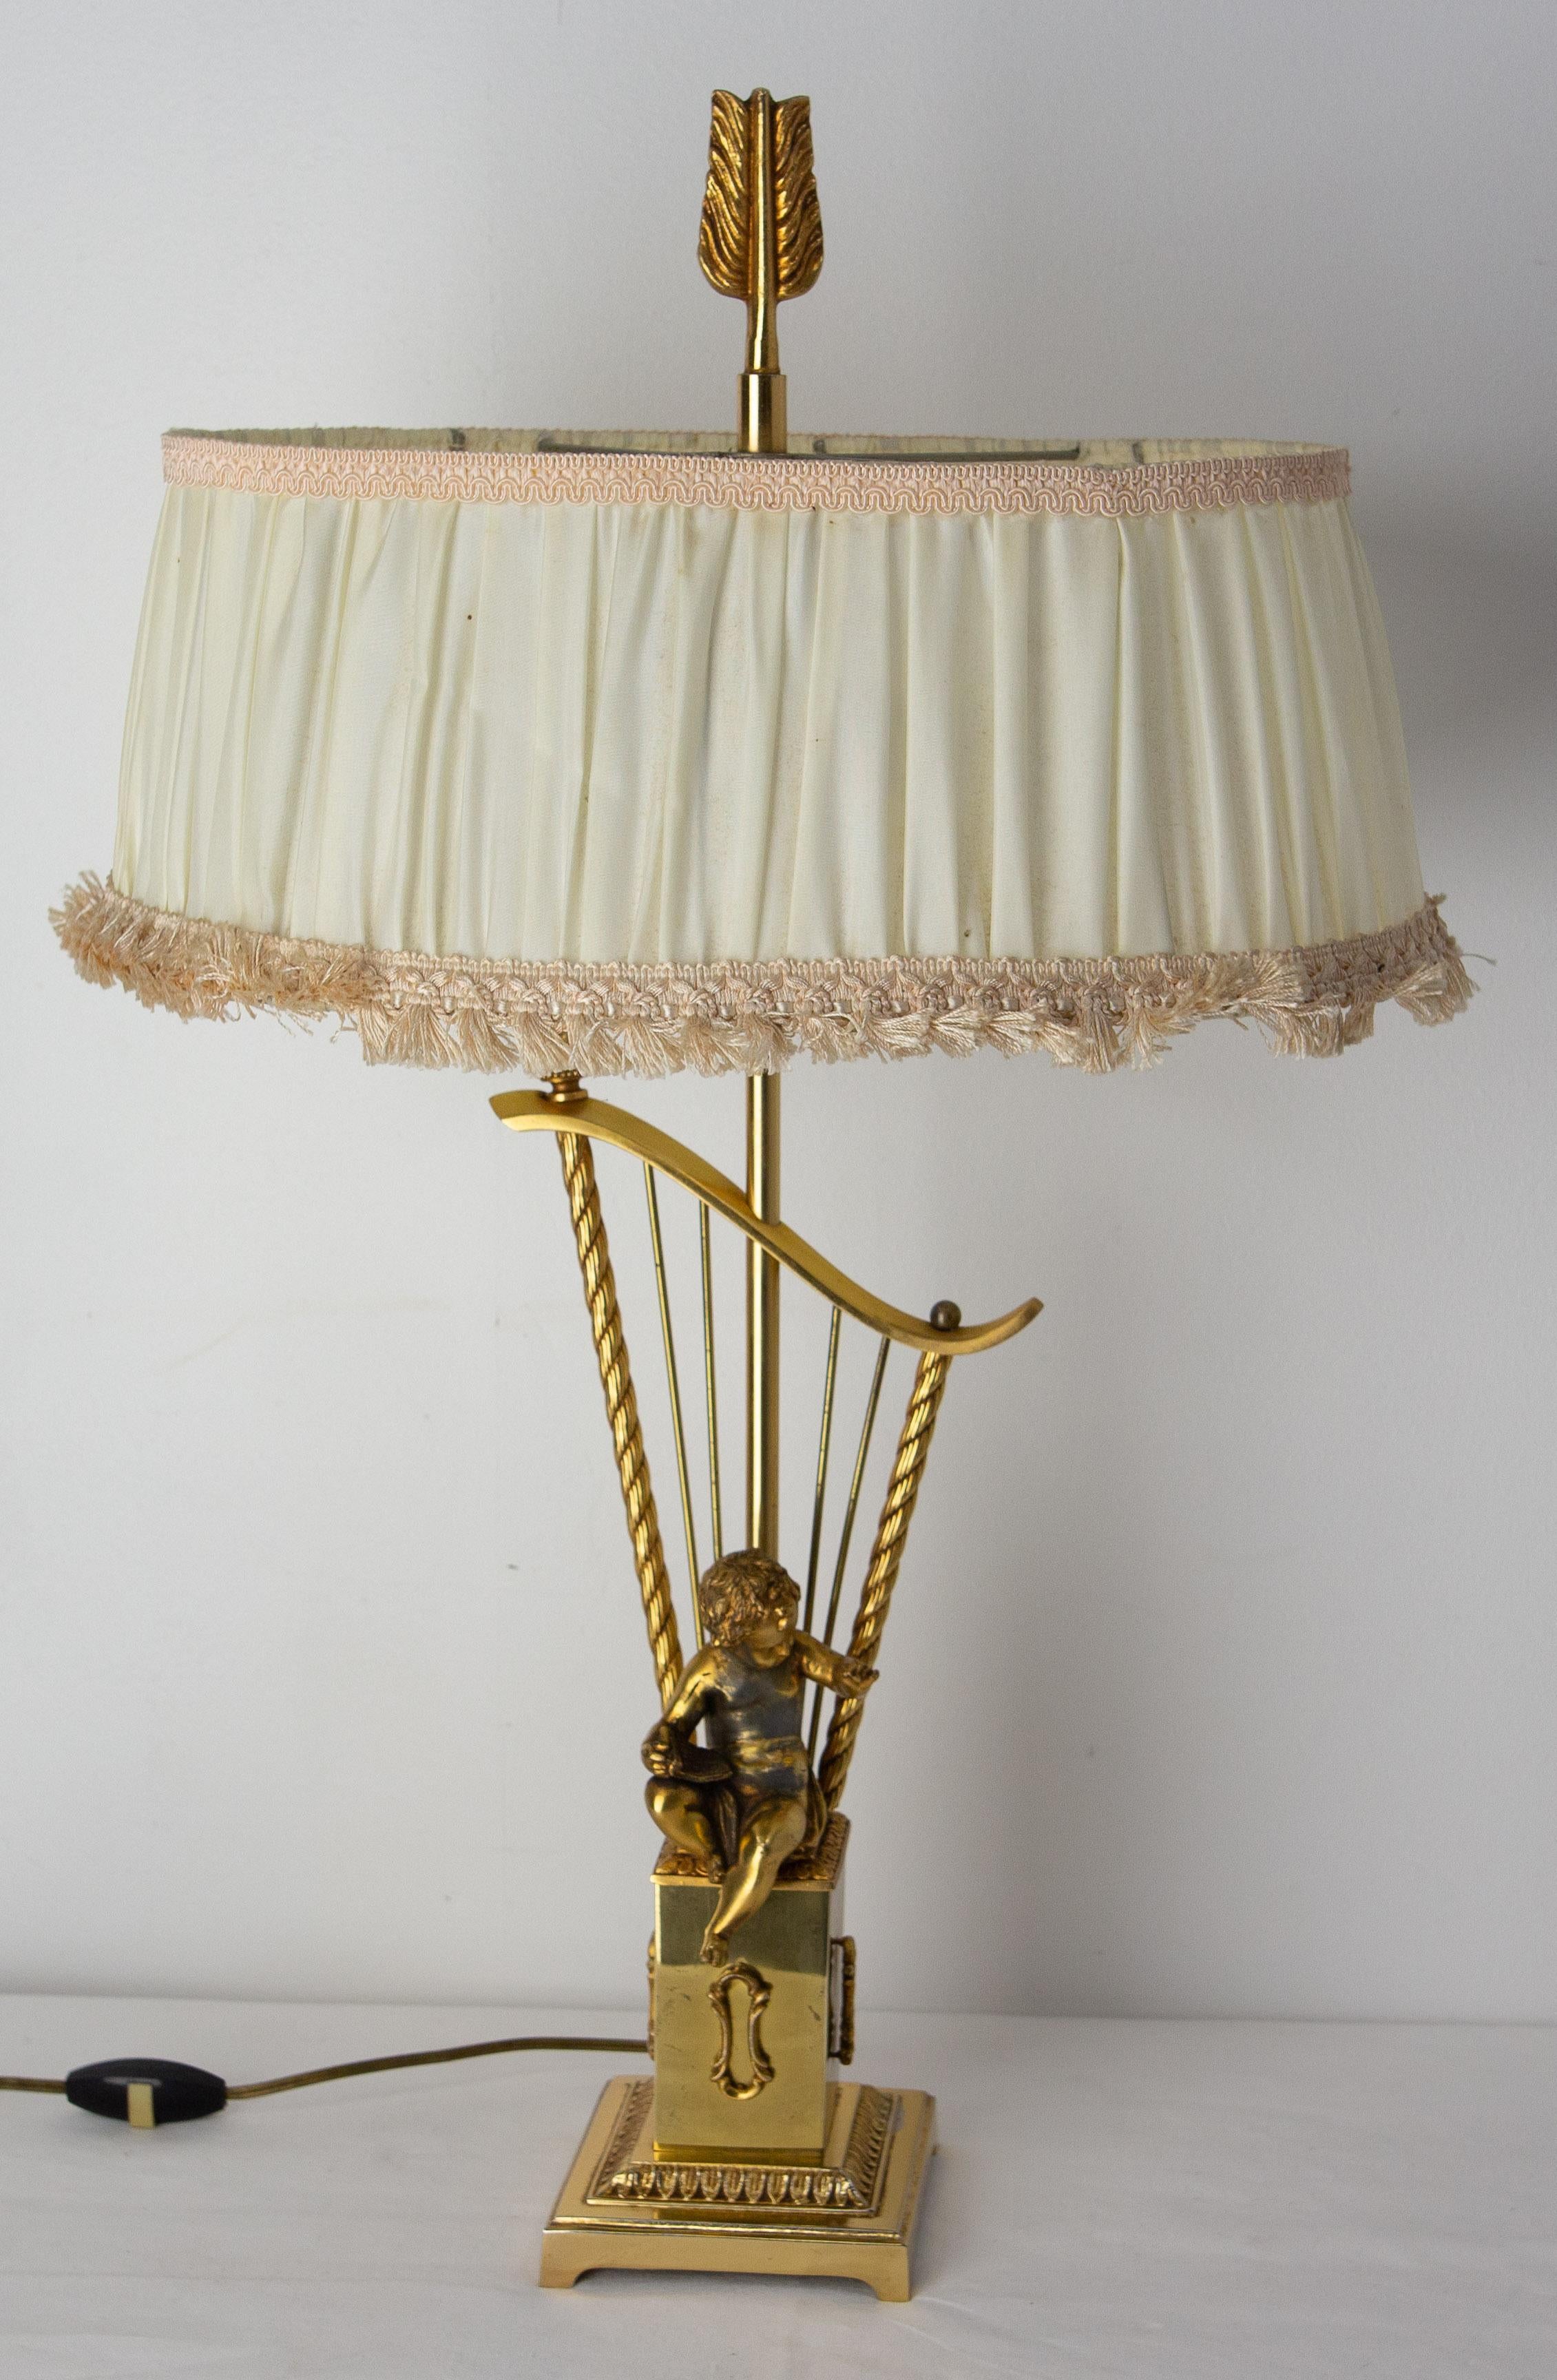 Brass table lamp.
Elegant lamp for a dining room, a living room or an entrance, perfect to create a subdued atmosphere.
A reading angel is depicted at the foot of the lamp, seated on a pedestal. 
The top of the lamp represents the stem of an